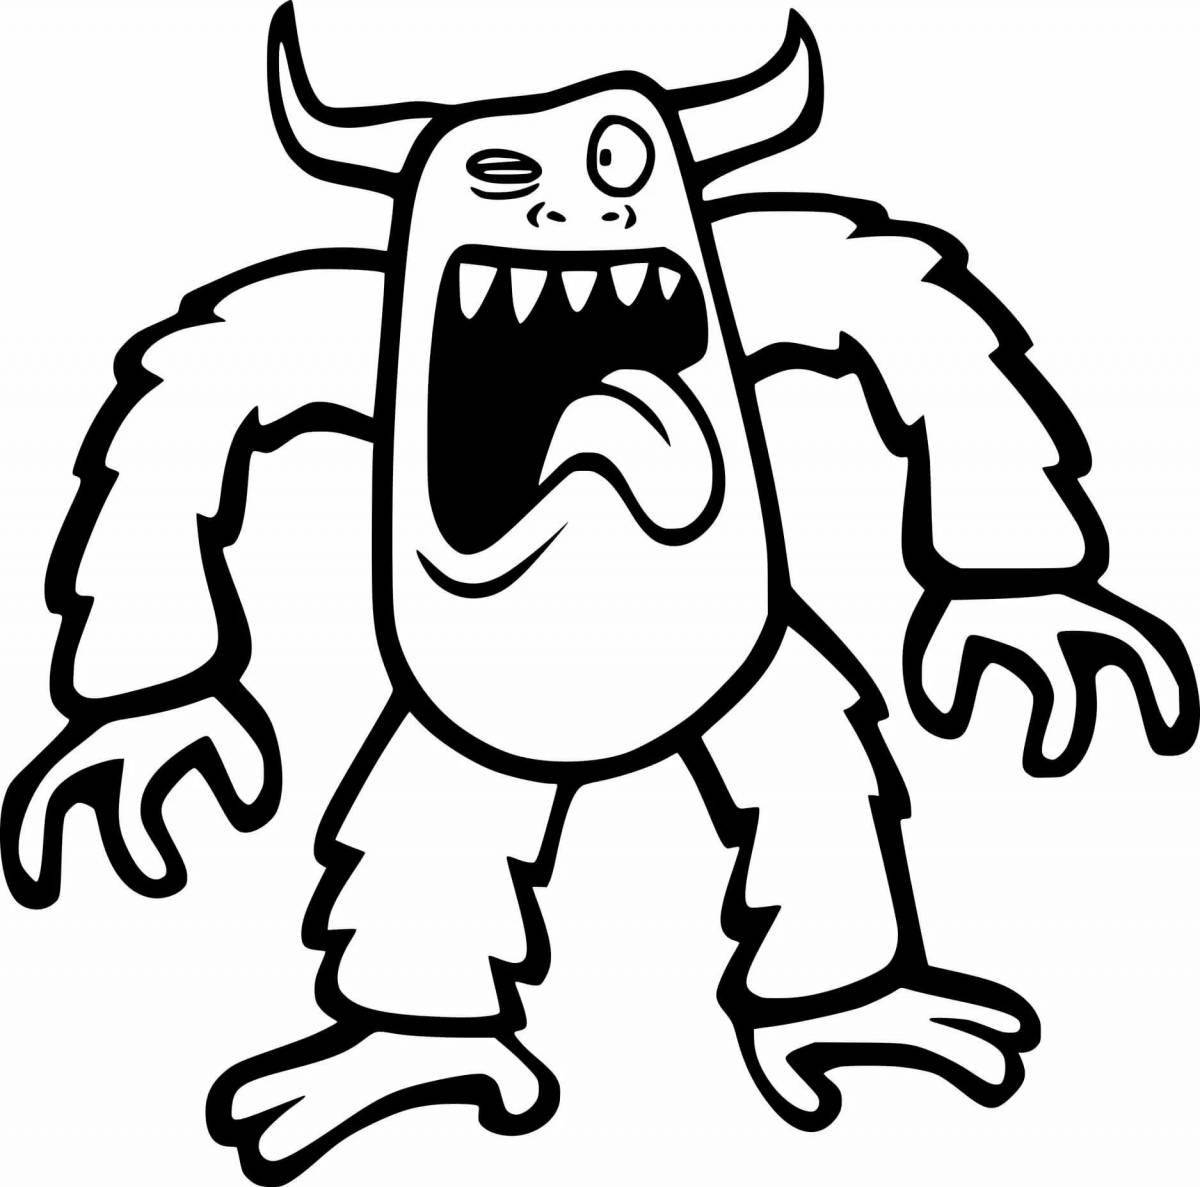 Creative coloring pages monsters for children 6-7 years old